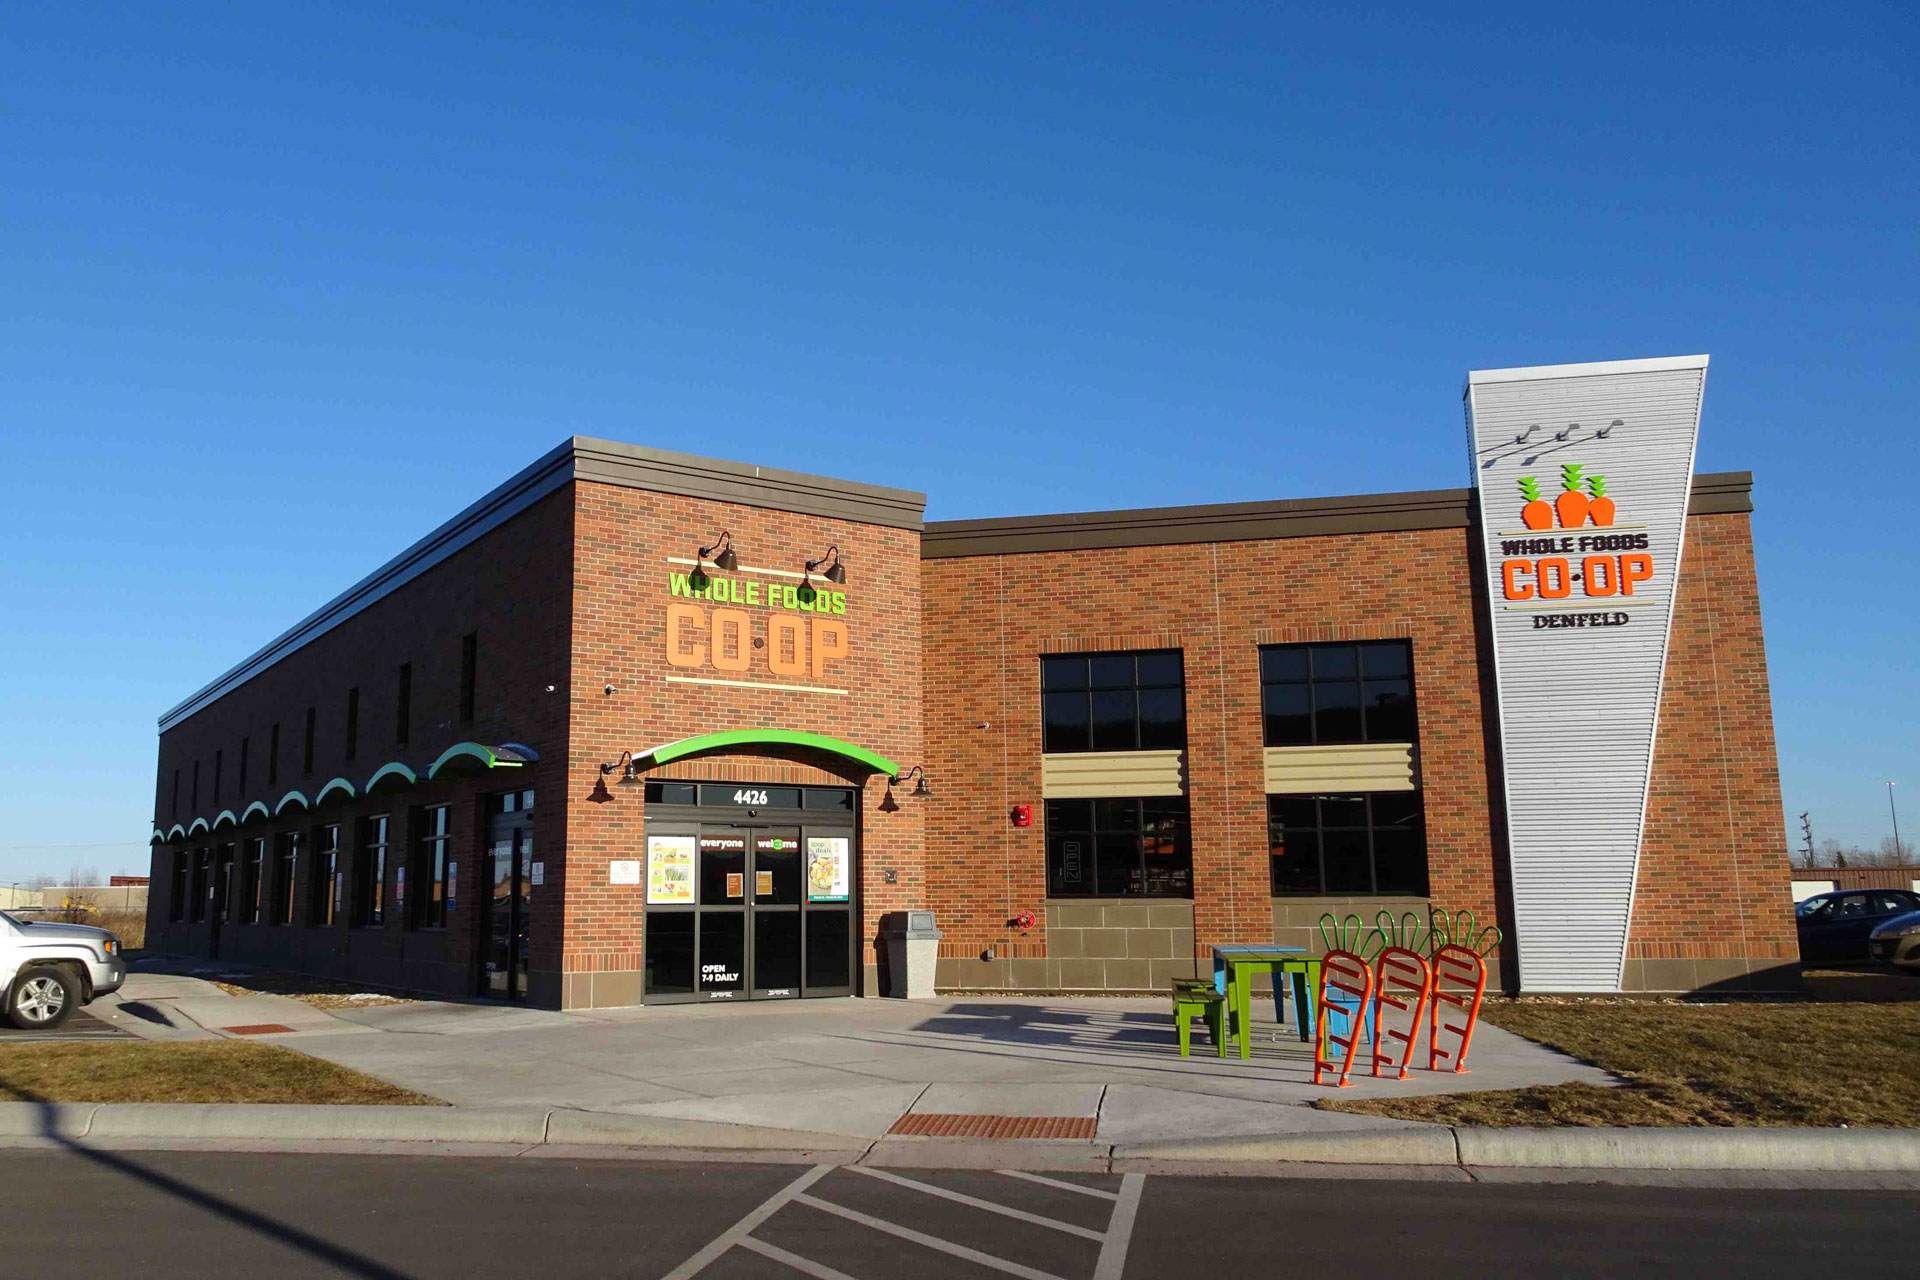 A brick building with signs reading "Whole Foods Co-op" above the entrance and on a tall panel stands proudly in Duluth, MN. The building features large windows and a bike rack out front. The entrance has double glass doors and some overhanging awnings, set against a clear sky backdrop.